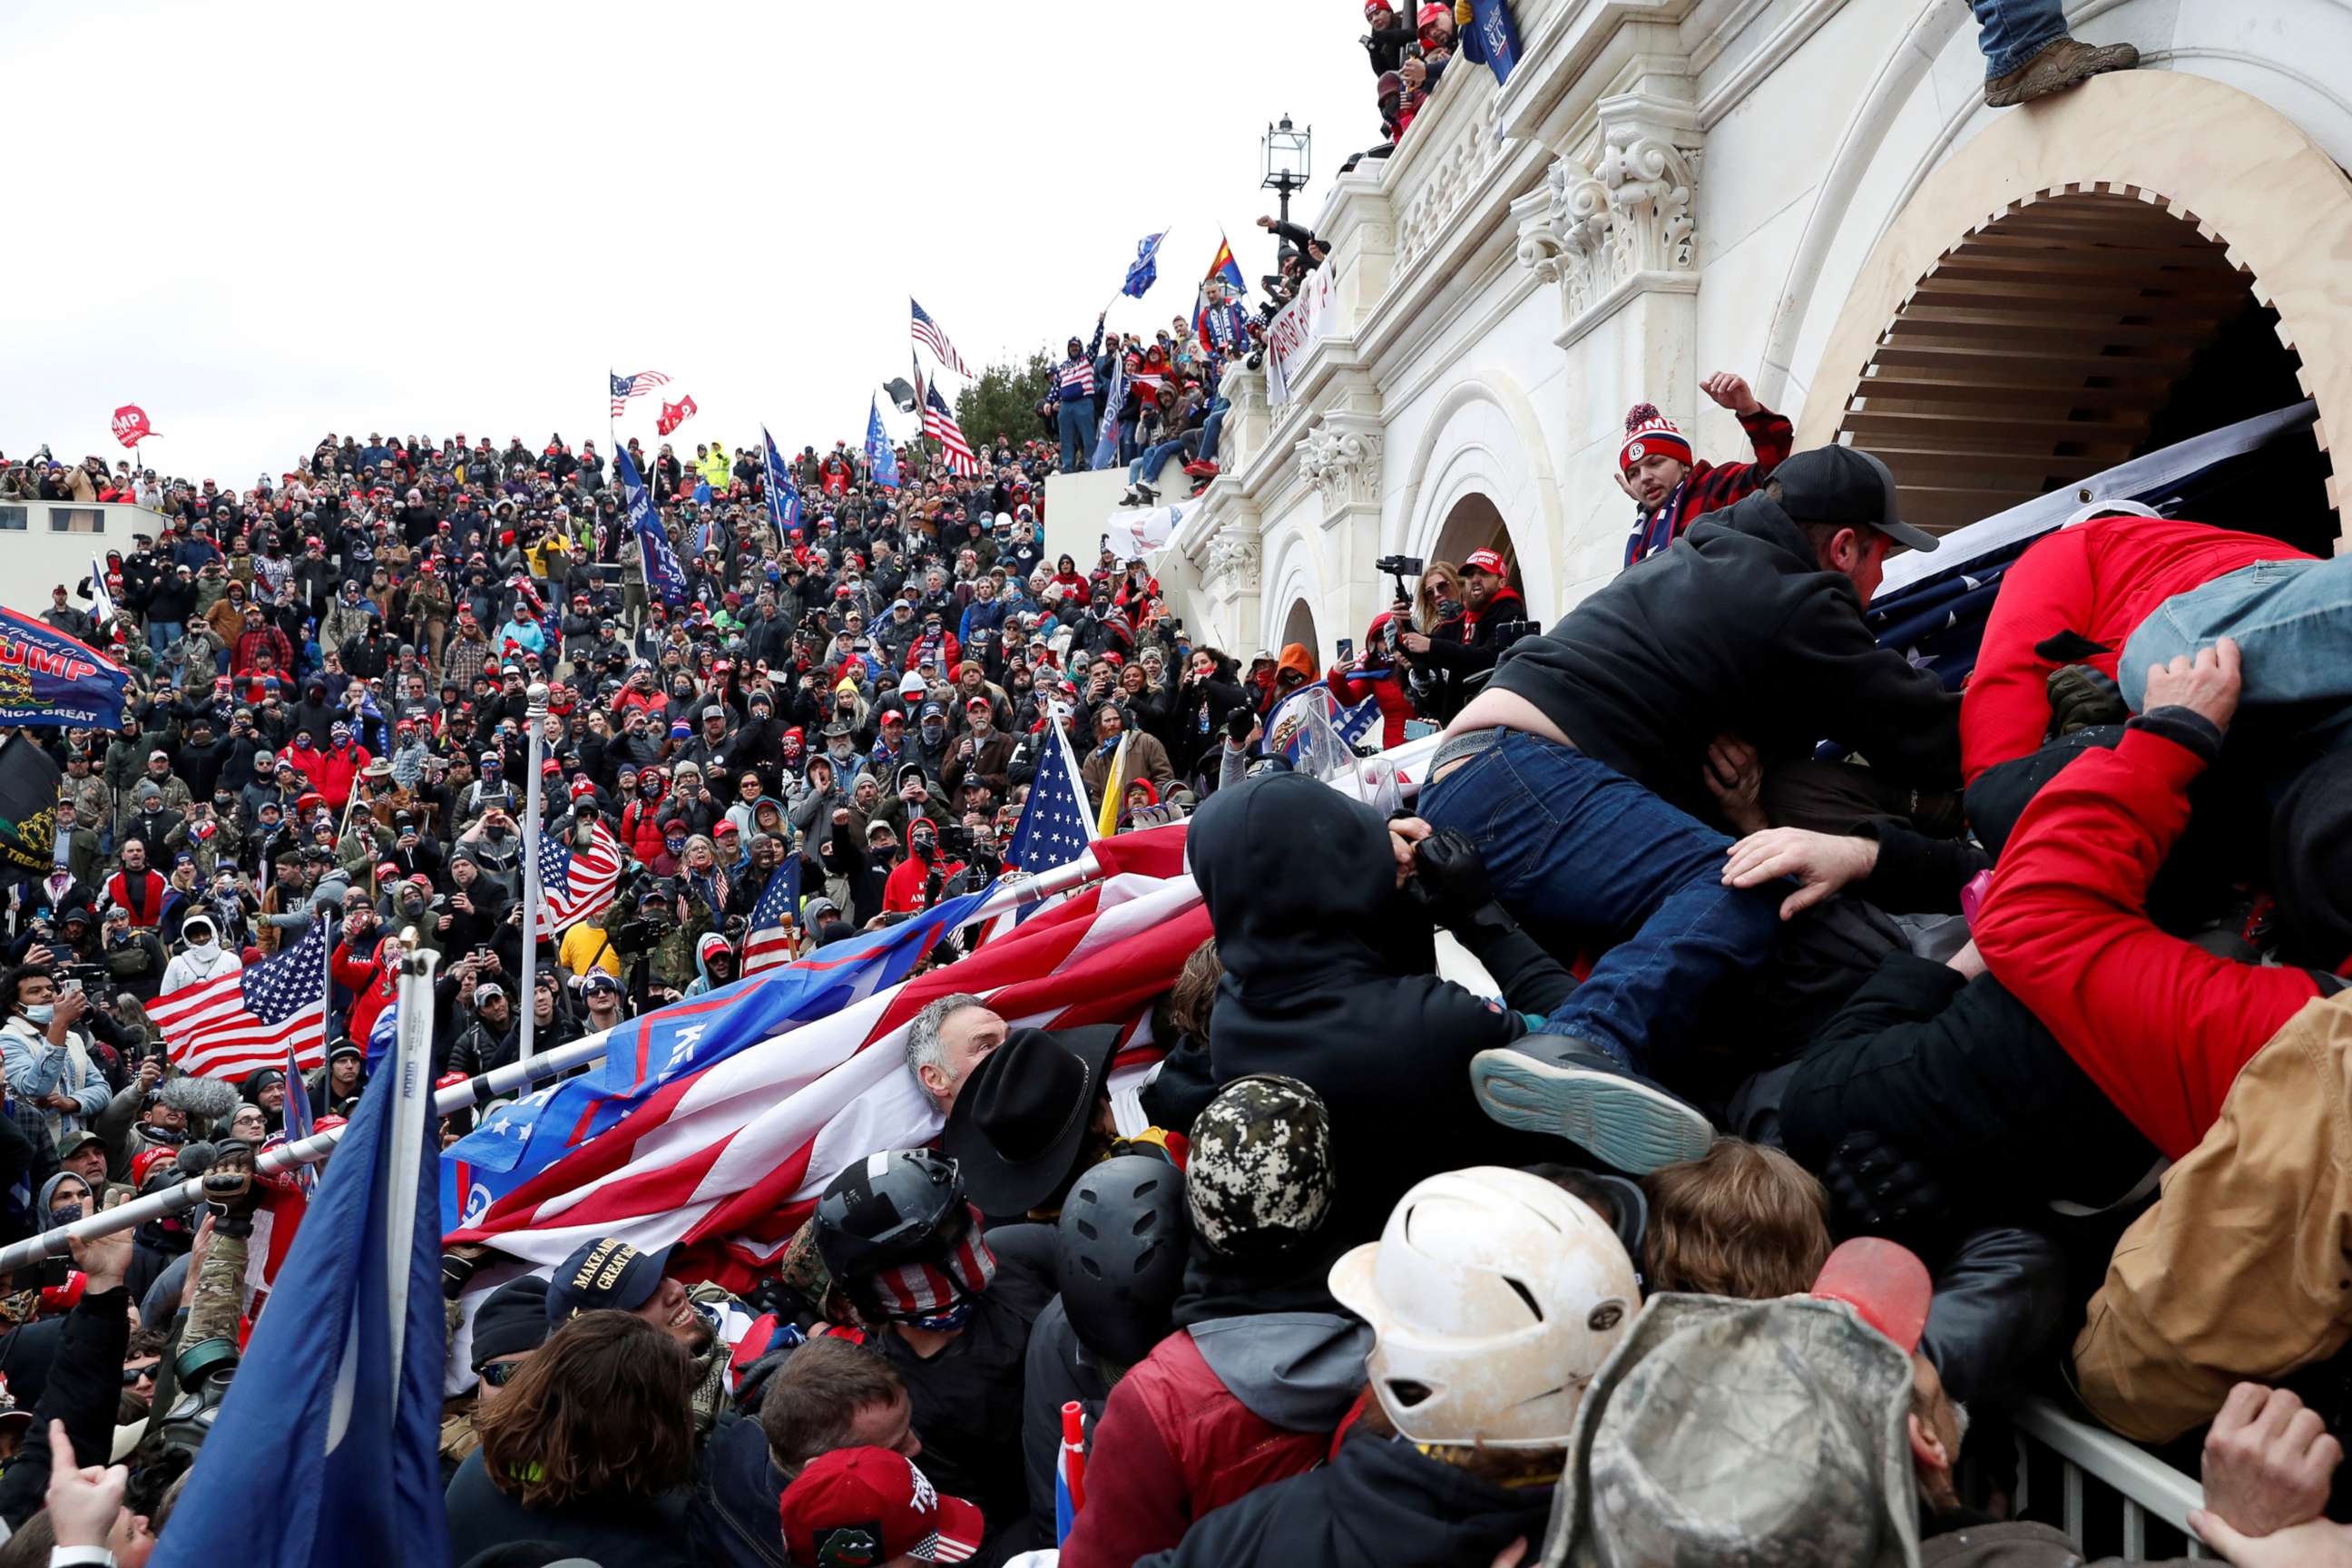 PHOTO: Pro-Trump protesters storm into the Capitol during clashes with police, during a rally to contest the certification of the 2020 presidential election results by the U.S. Congress, in Washington, D.C., Jan. 6, 2021.